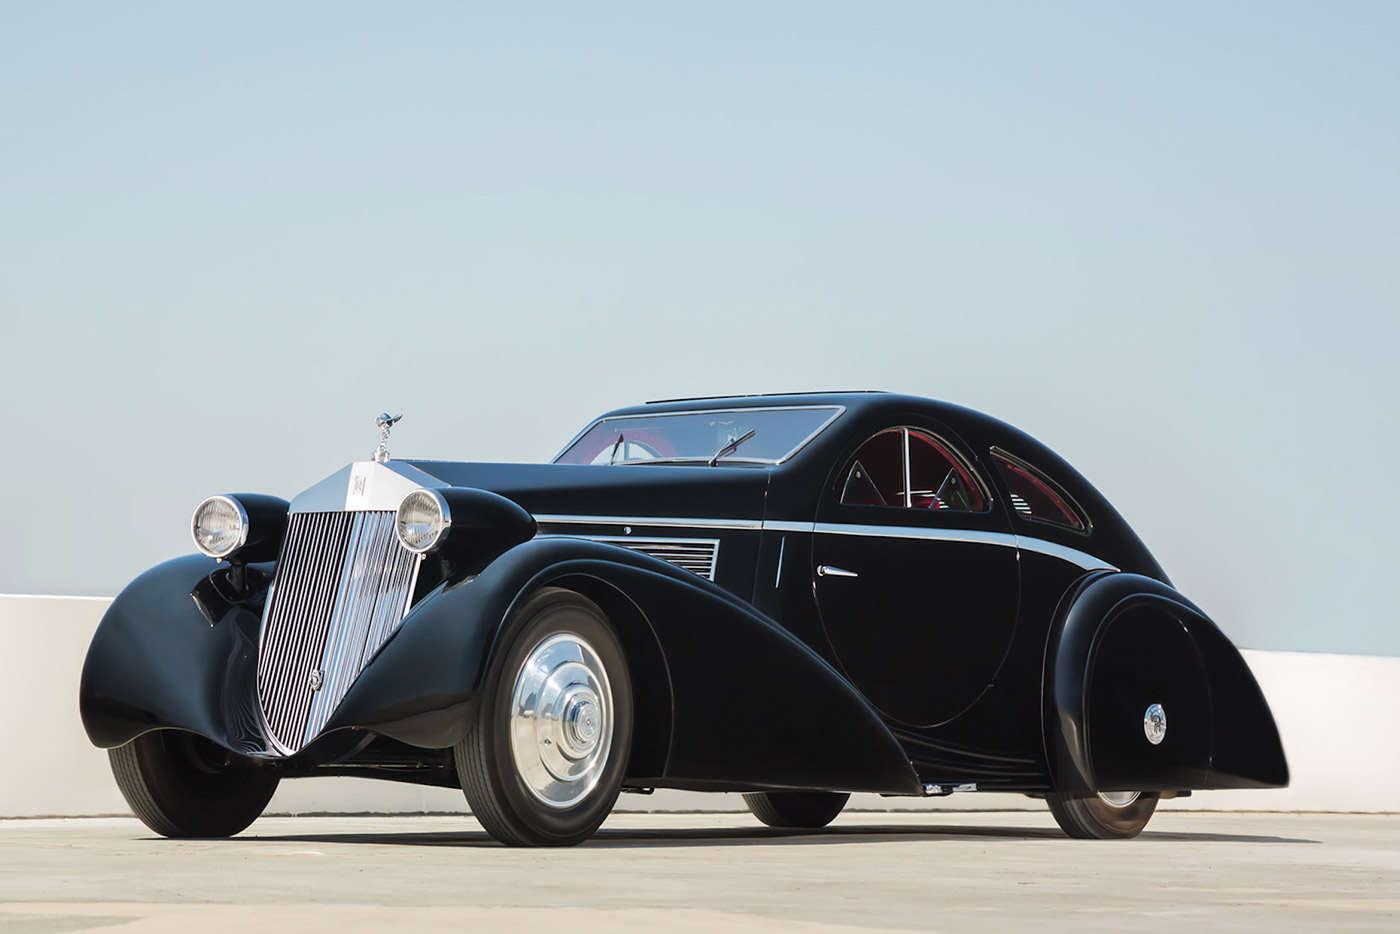 1925 &#x201C;Round Door&#x201D; Rolls-Royce Phantom: Re-bodied in 1934, the coupe is known for its sinuous body, low profile, and most of all, its perfectly circular doors